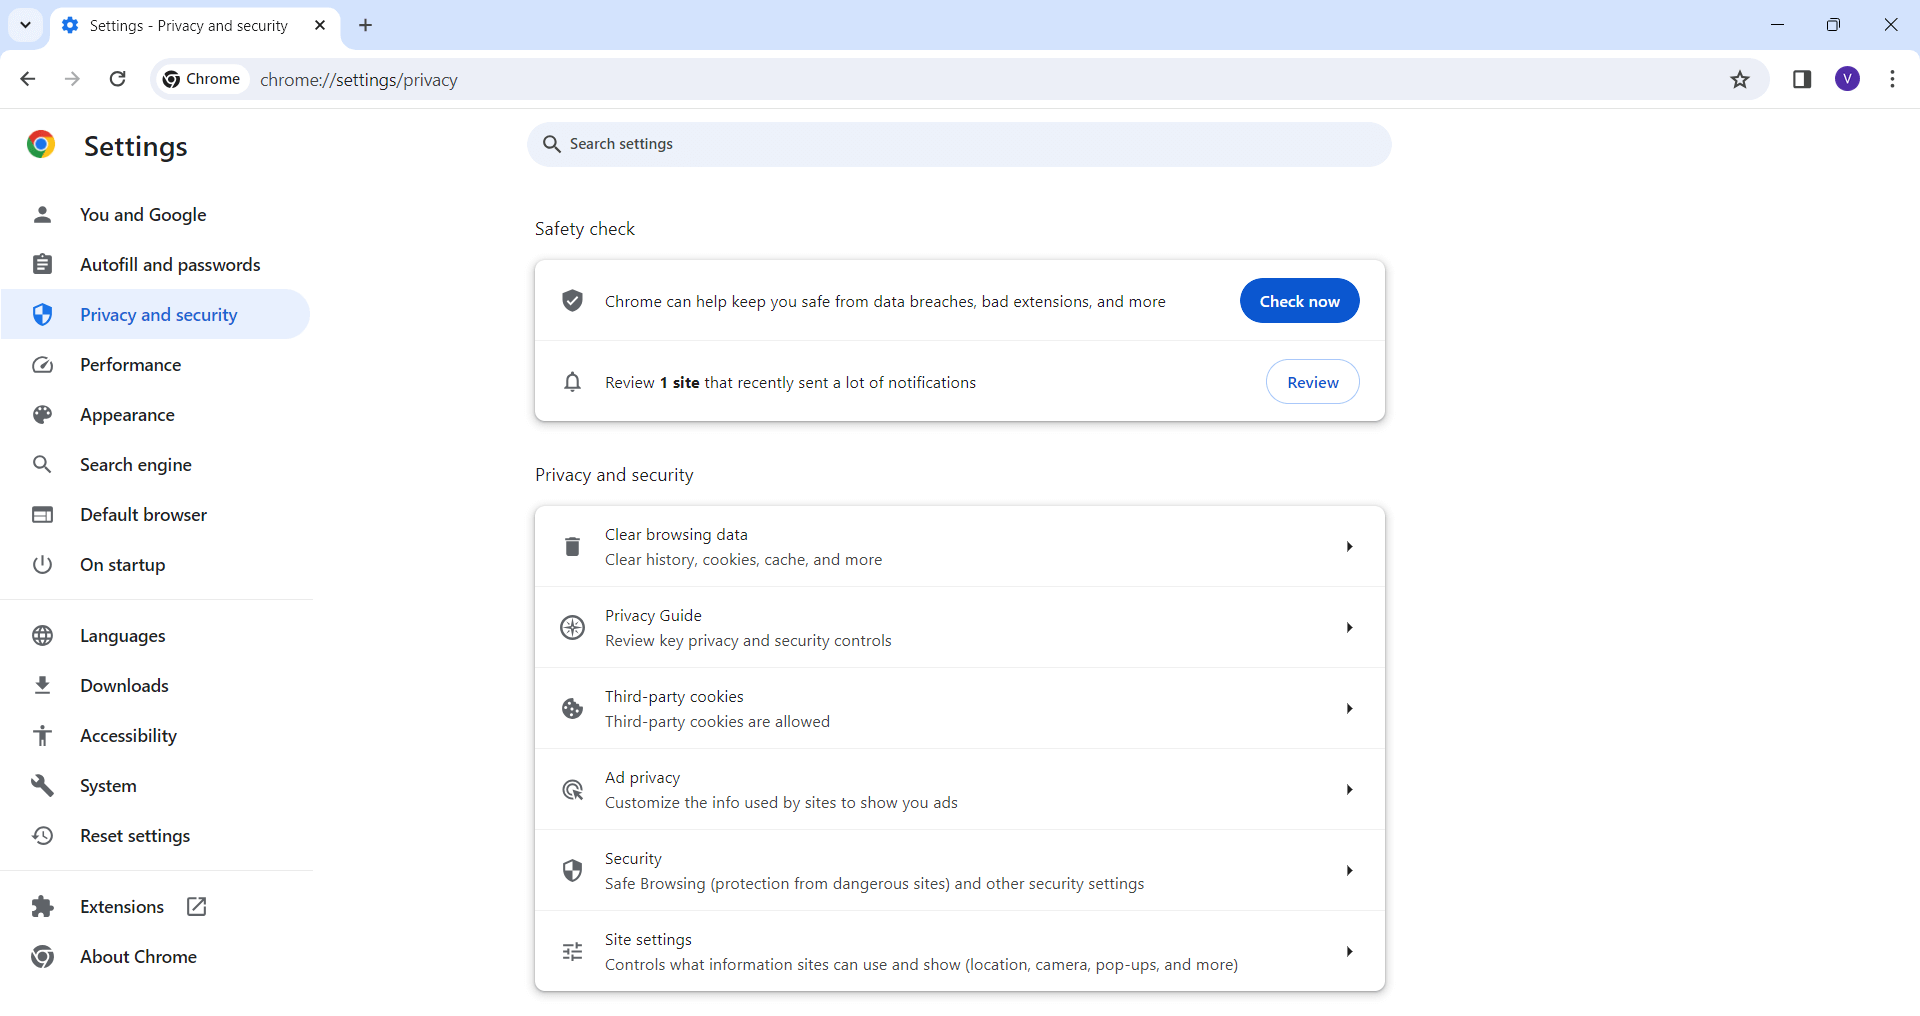 Chrome - Privacy and Security